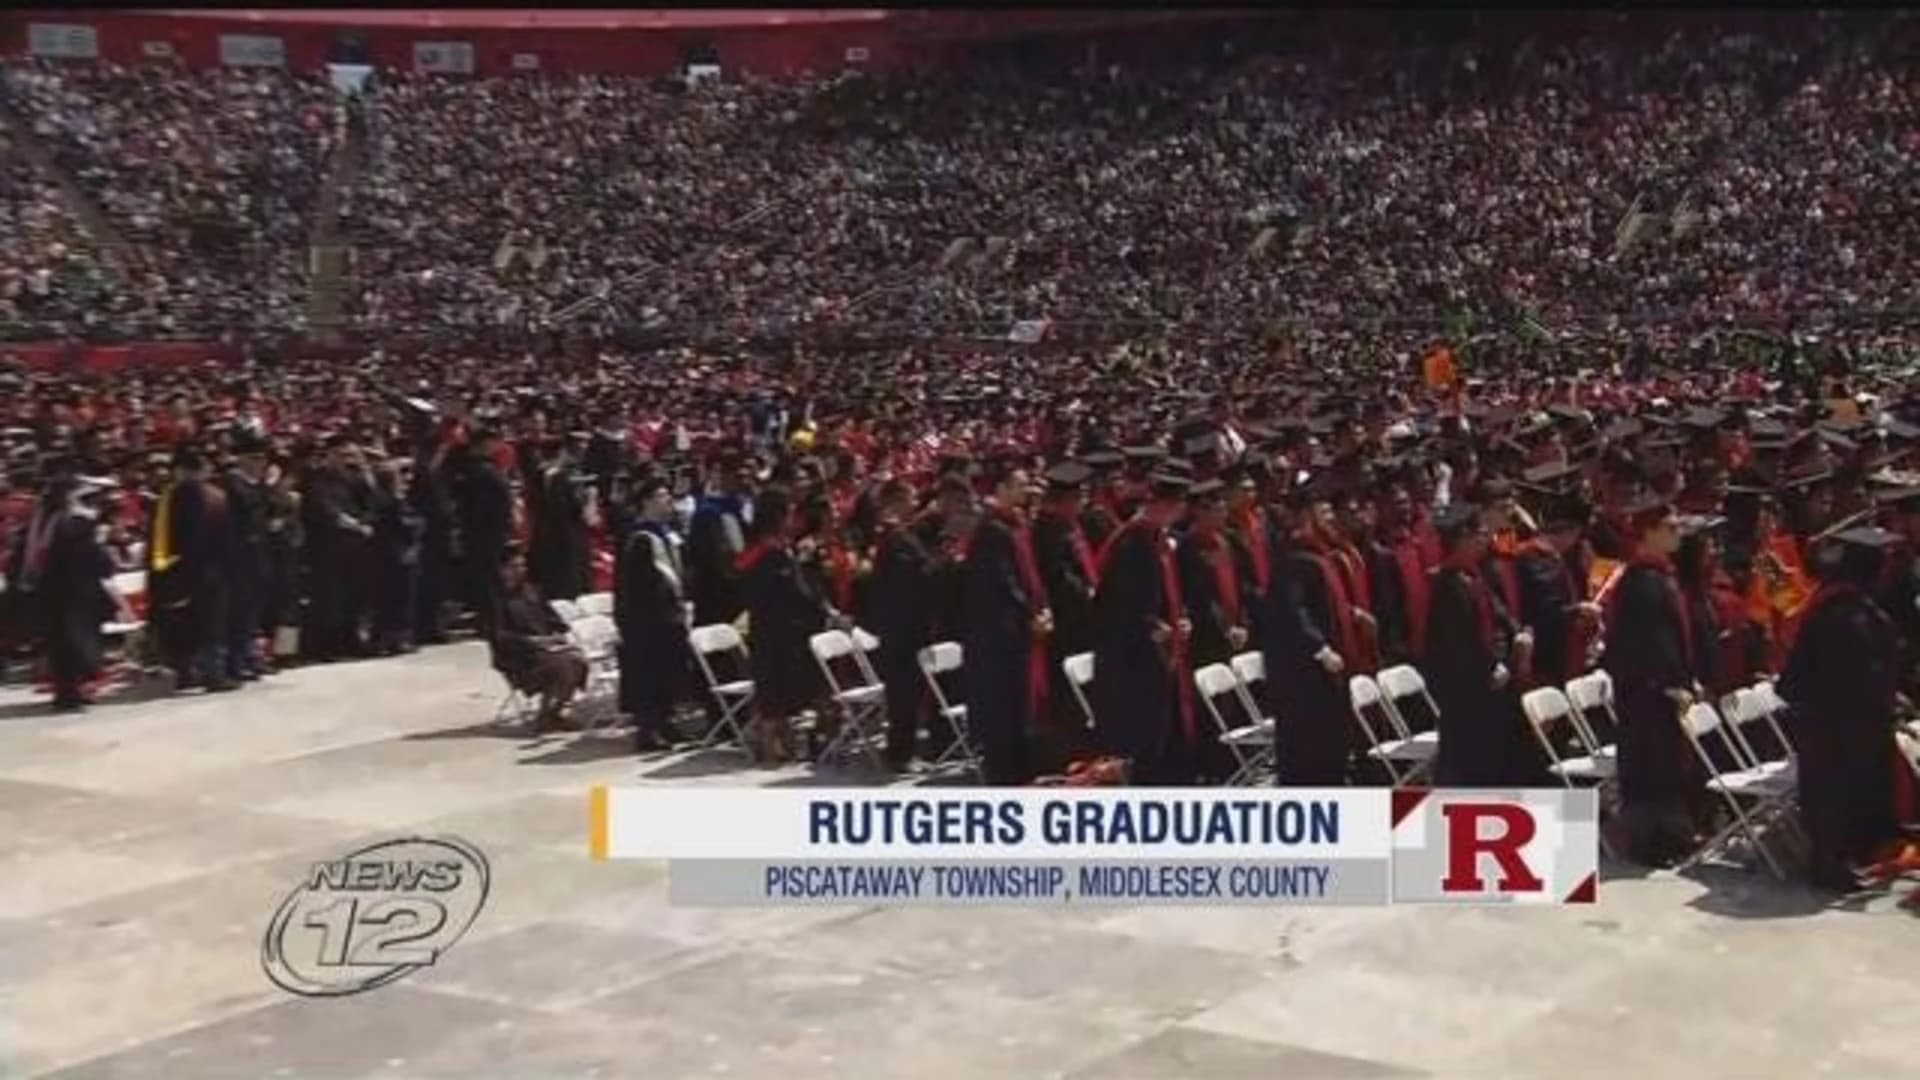 Thousands of students graduate from Rutgers